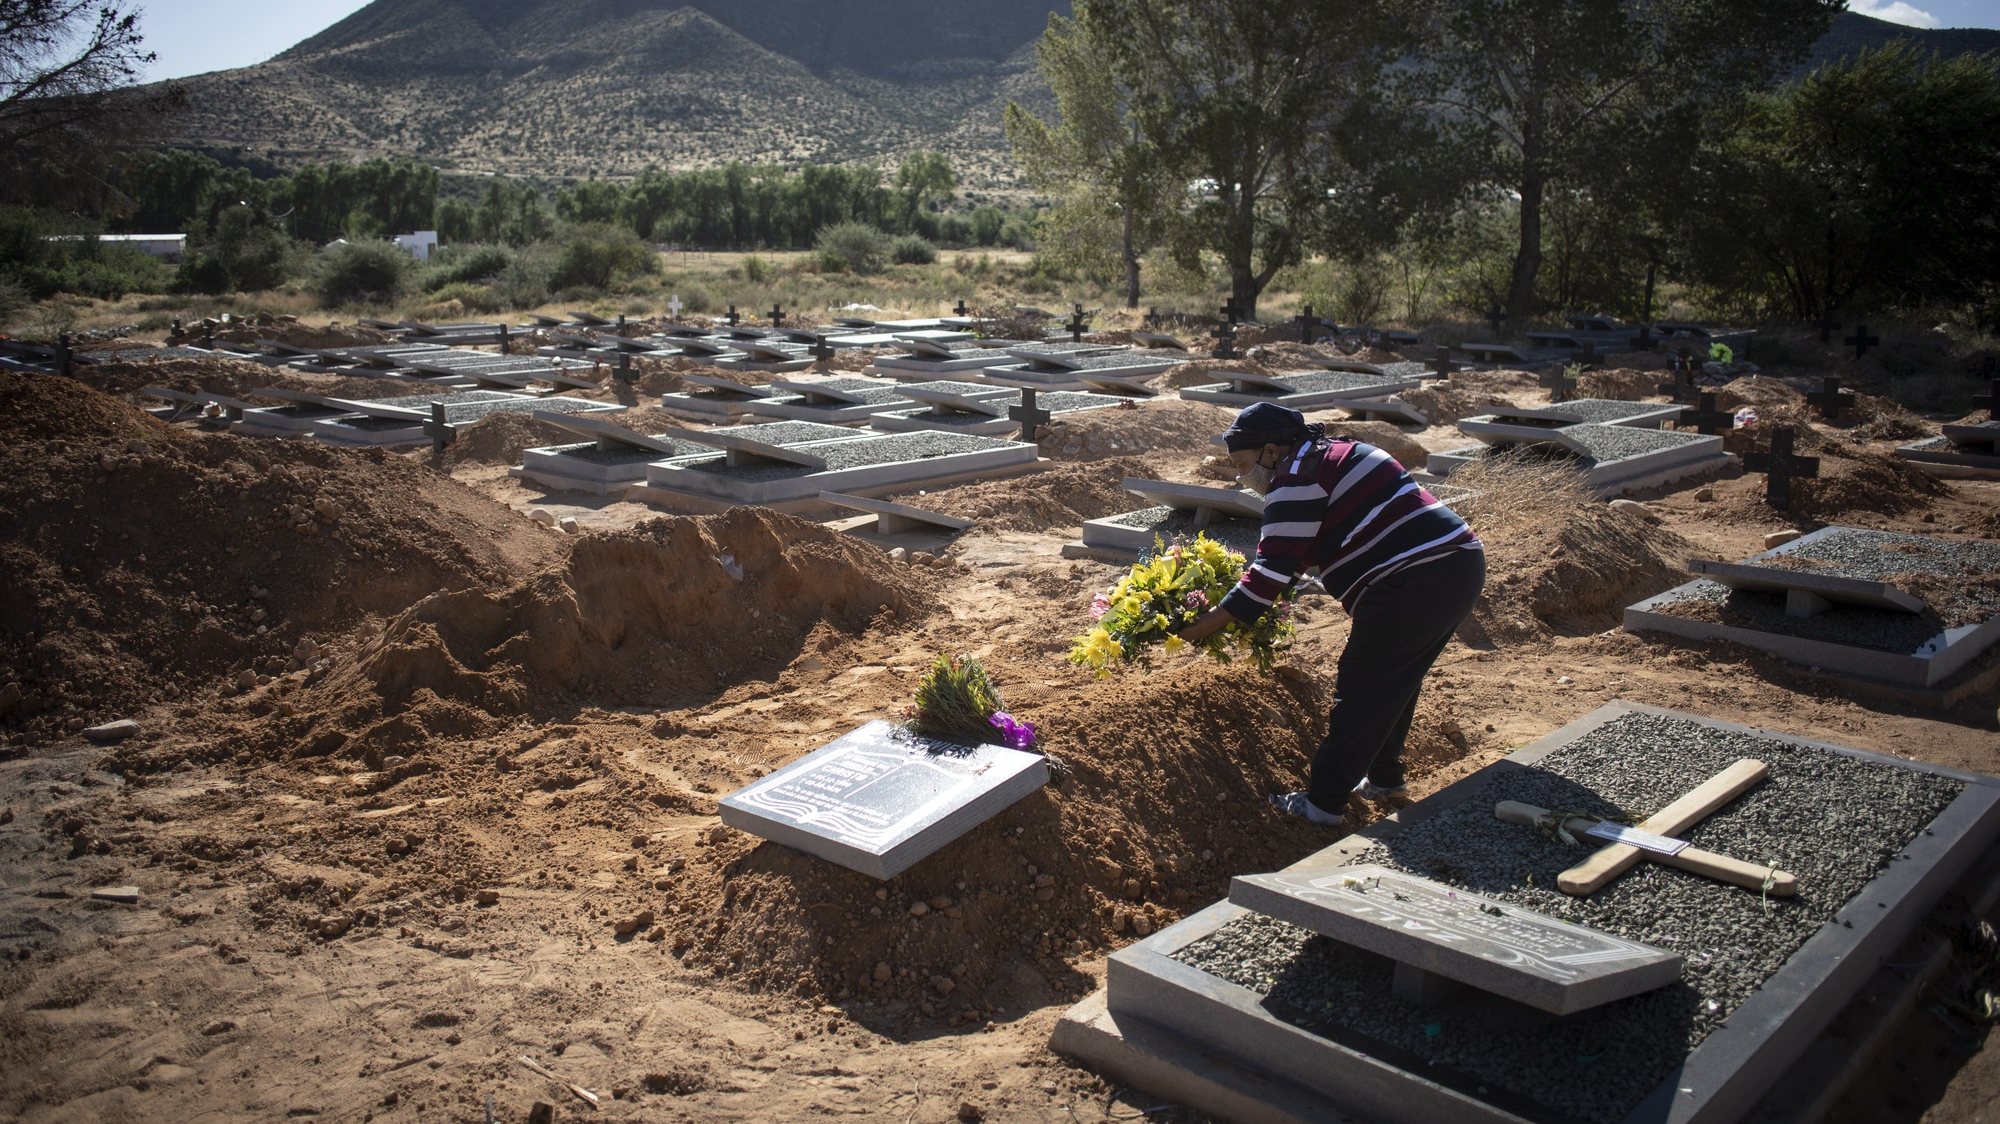 epa08493522 (28/28) A grieving friend lays flowers on the grave of recently deceased Covid-19 victim, Cristo Lewies,  Graaff Reinet, South Africa, 12 June 2020. Cristo was the second coronavirus victim to be buried in the graveyard as the rate of infection increases in the area. 
In the barren expanses of the Karoo (Great dry land) in the Eastern Cape province of South Africa, a perfect storm of circumstances has had a major and devastating effect on the local people. Three months of Covid-19 coronavirus lockdown, a harsh seven-year drought, and the ongoing impact of the general economic slowdown over the past years along with an ill-prepared local and provincial government have left the vast majority of the local people under financial, physical and spiritual pressure.  EPA/KIM LUDBROOK   ATTENTION: For the full PHOTO ESSAY text please see Advisory Notice  epa08493494